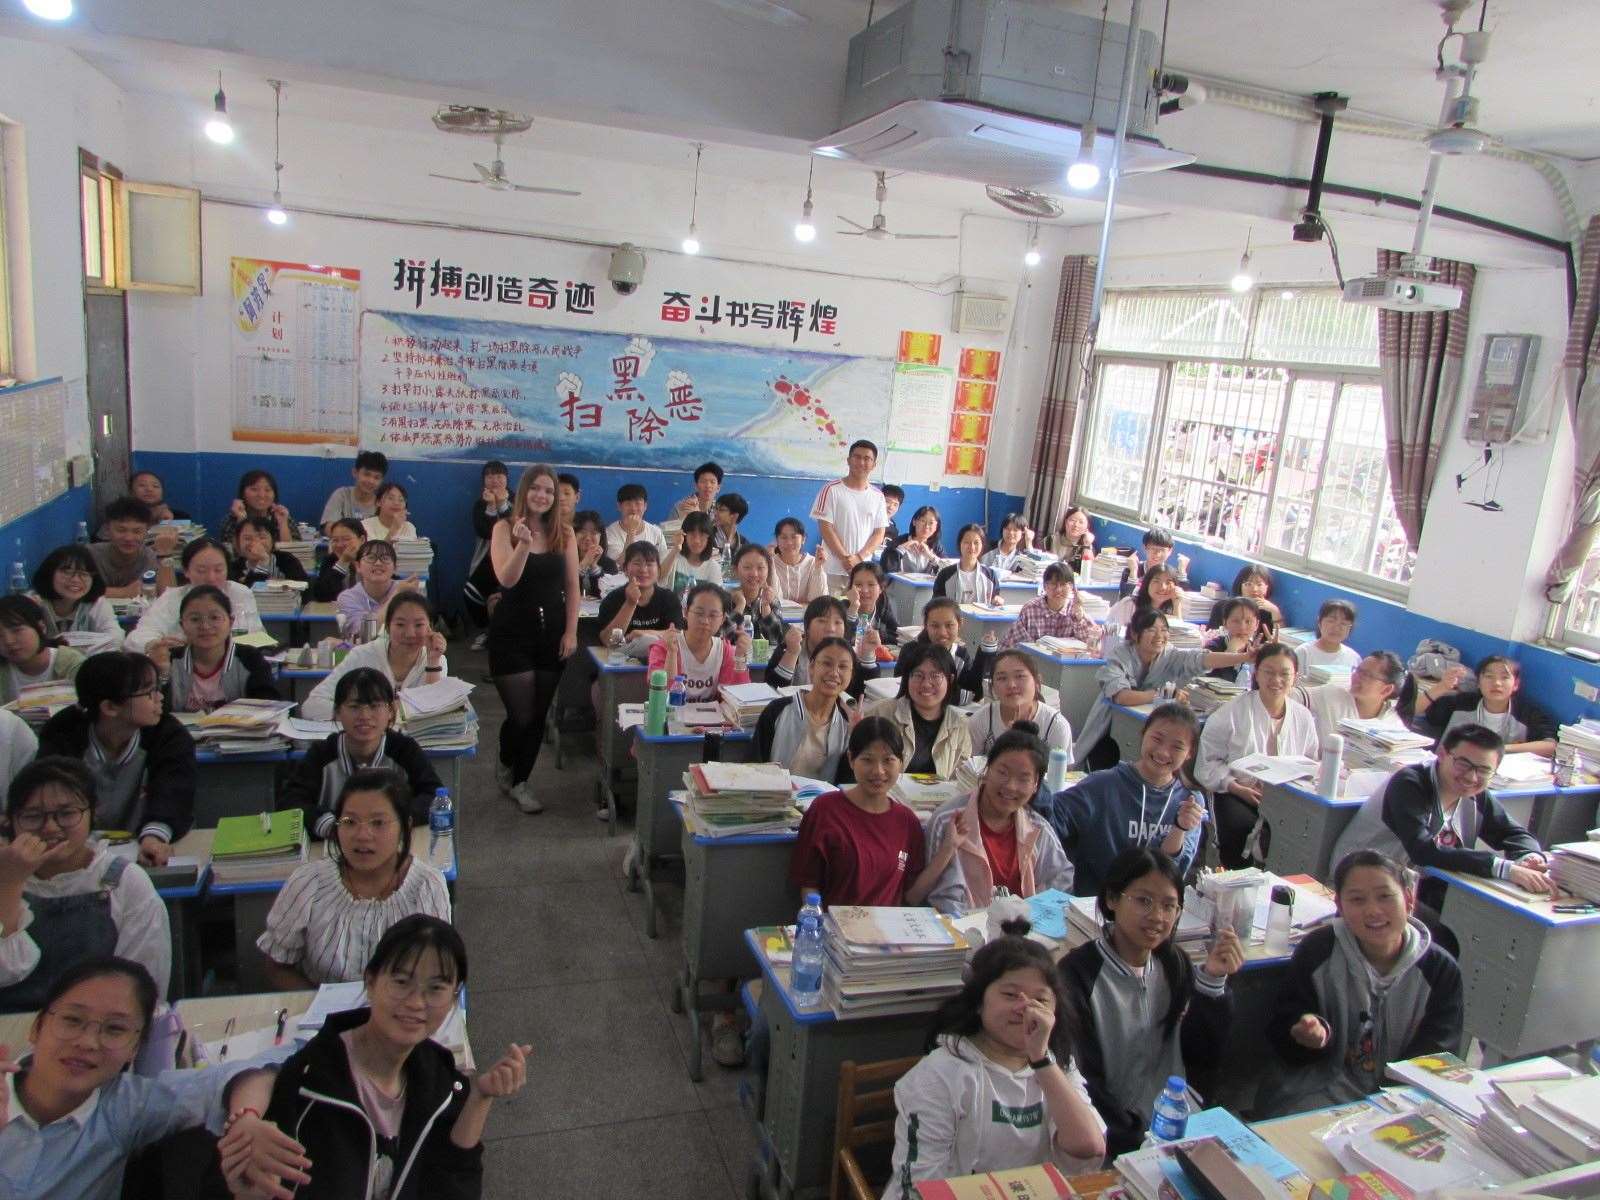 Sophie at work in the classroom. A typical class contained 70 pupils.